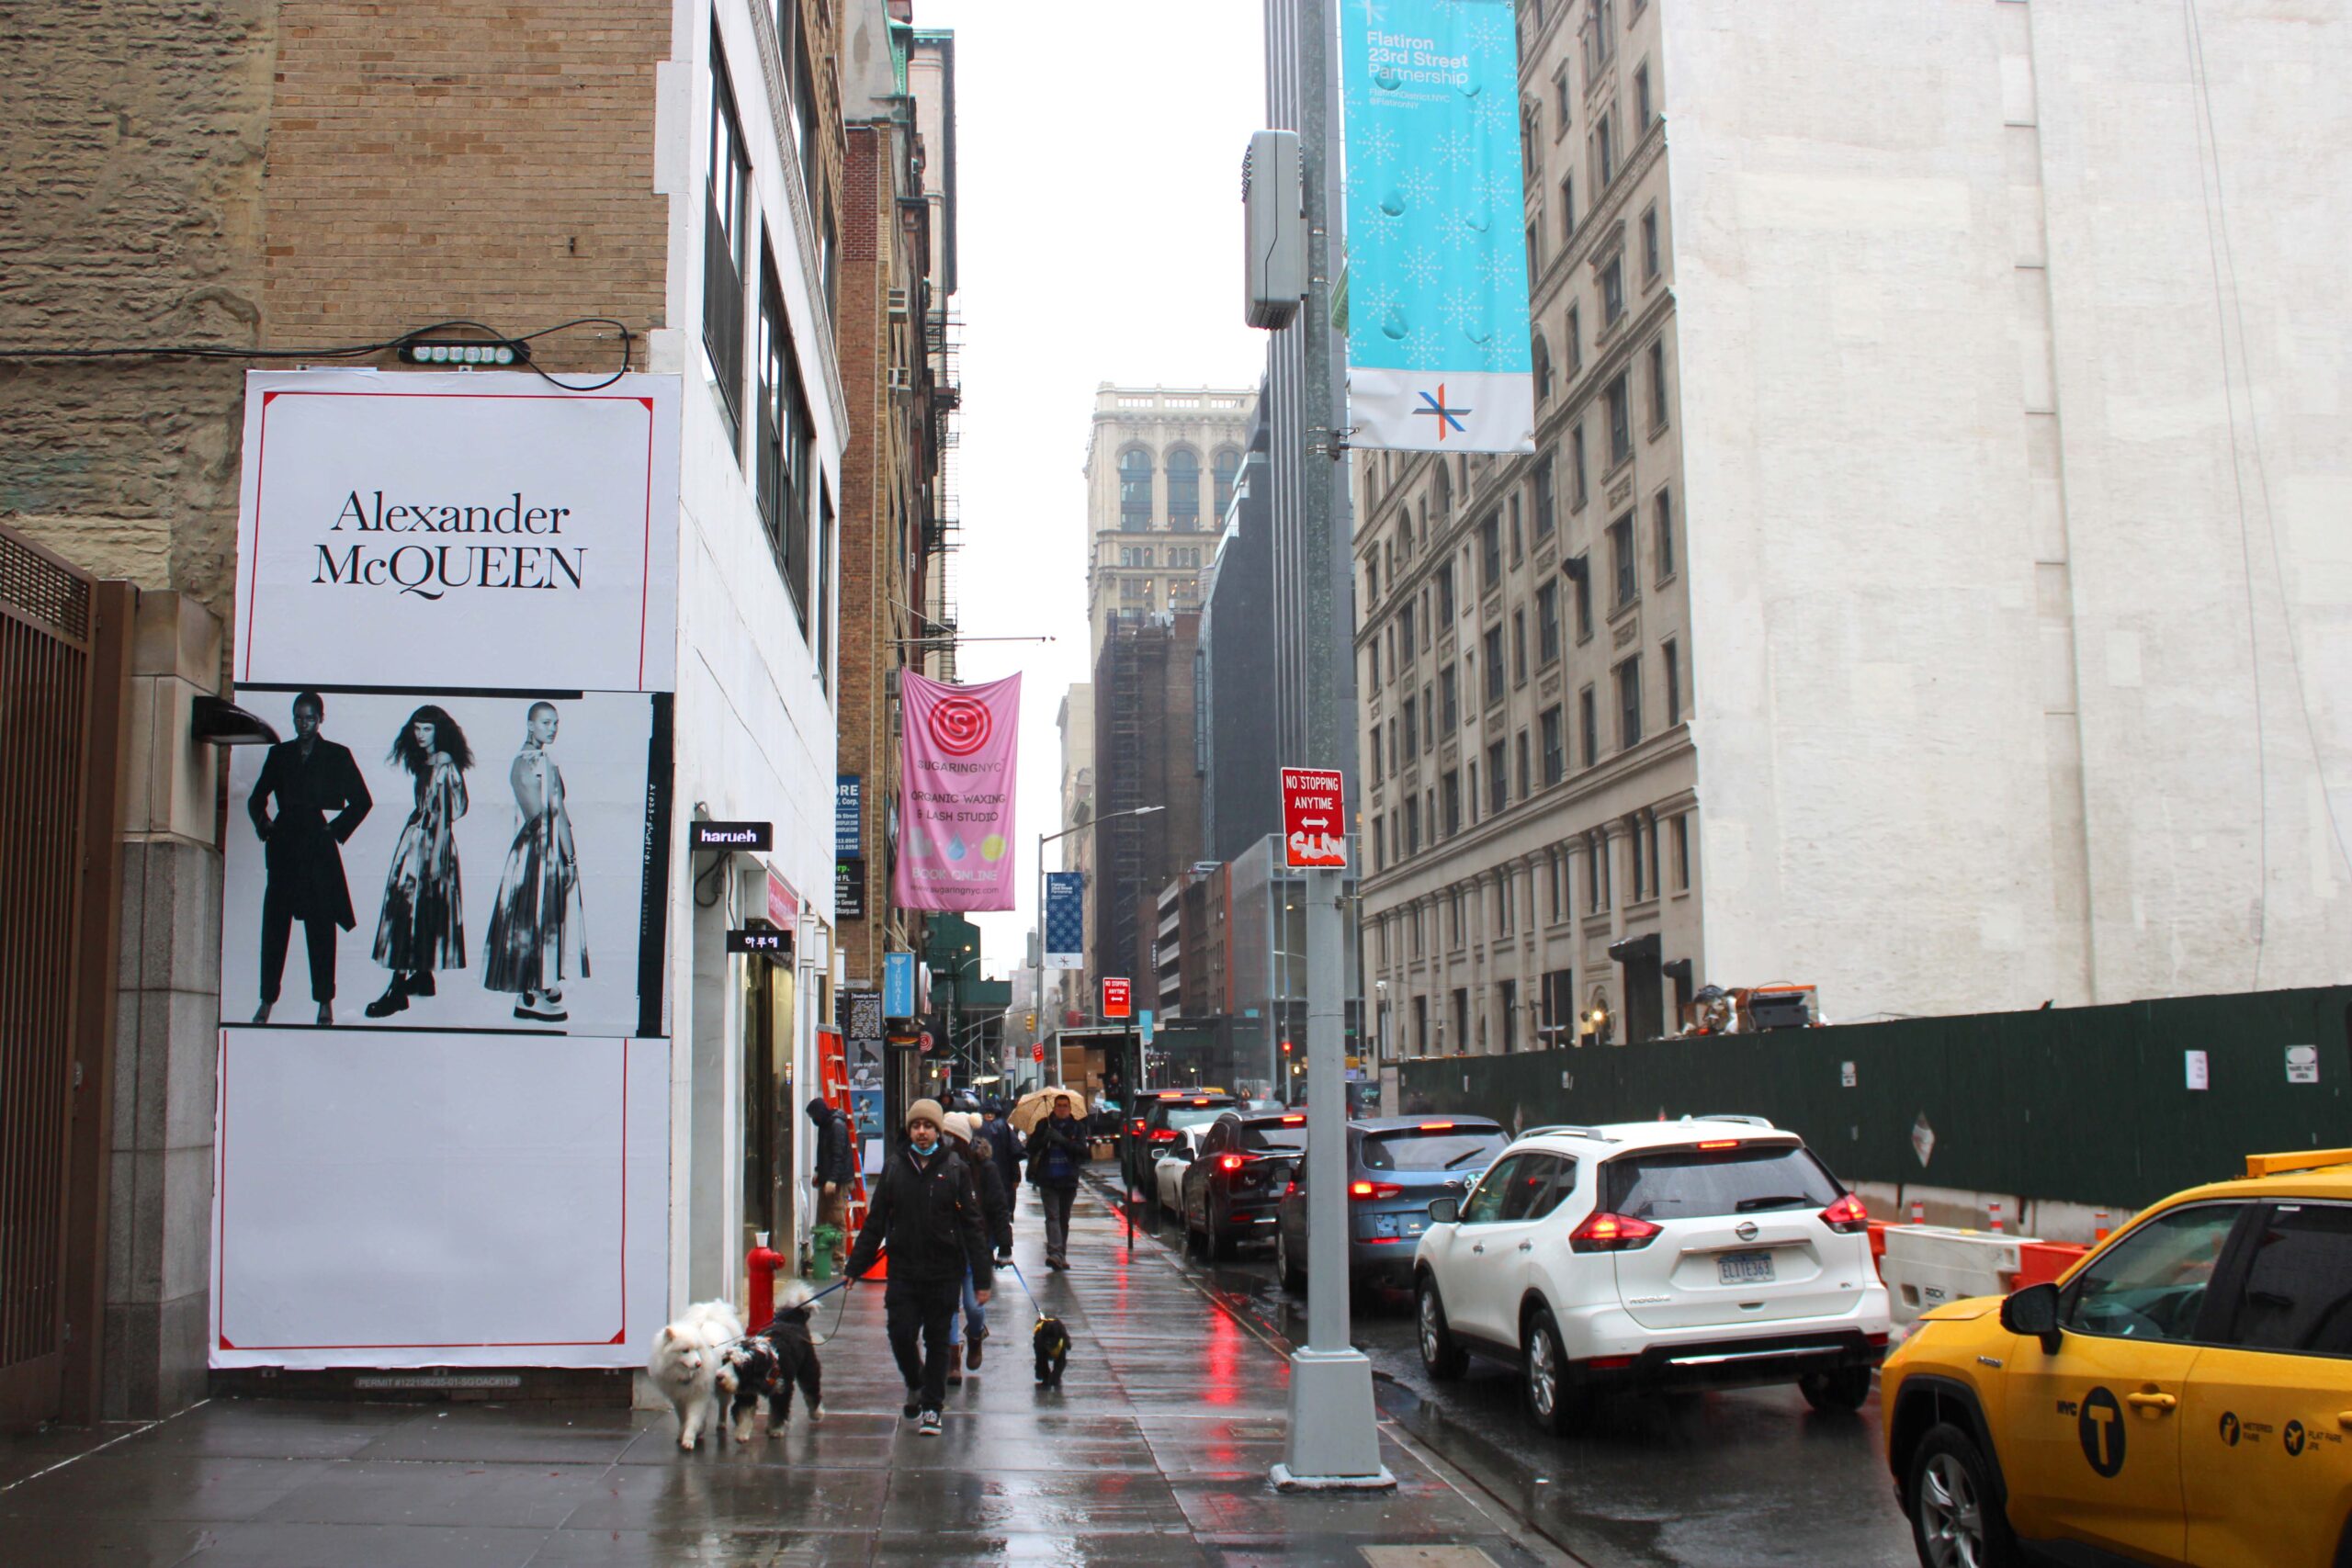 Alexander McQueen NYC Wallscapes W 30th St between 5th & Broadway OOH Advertising Alchemy Media